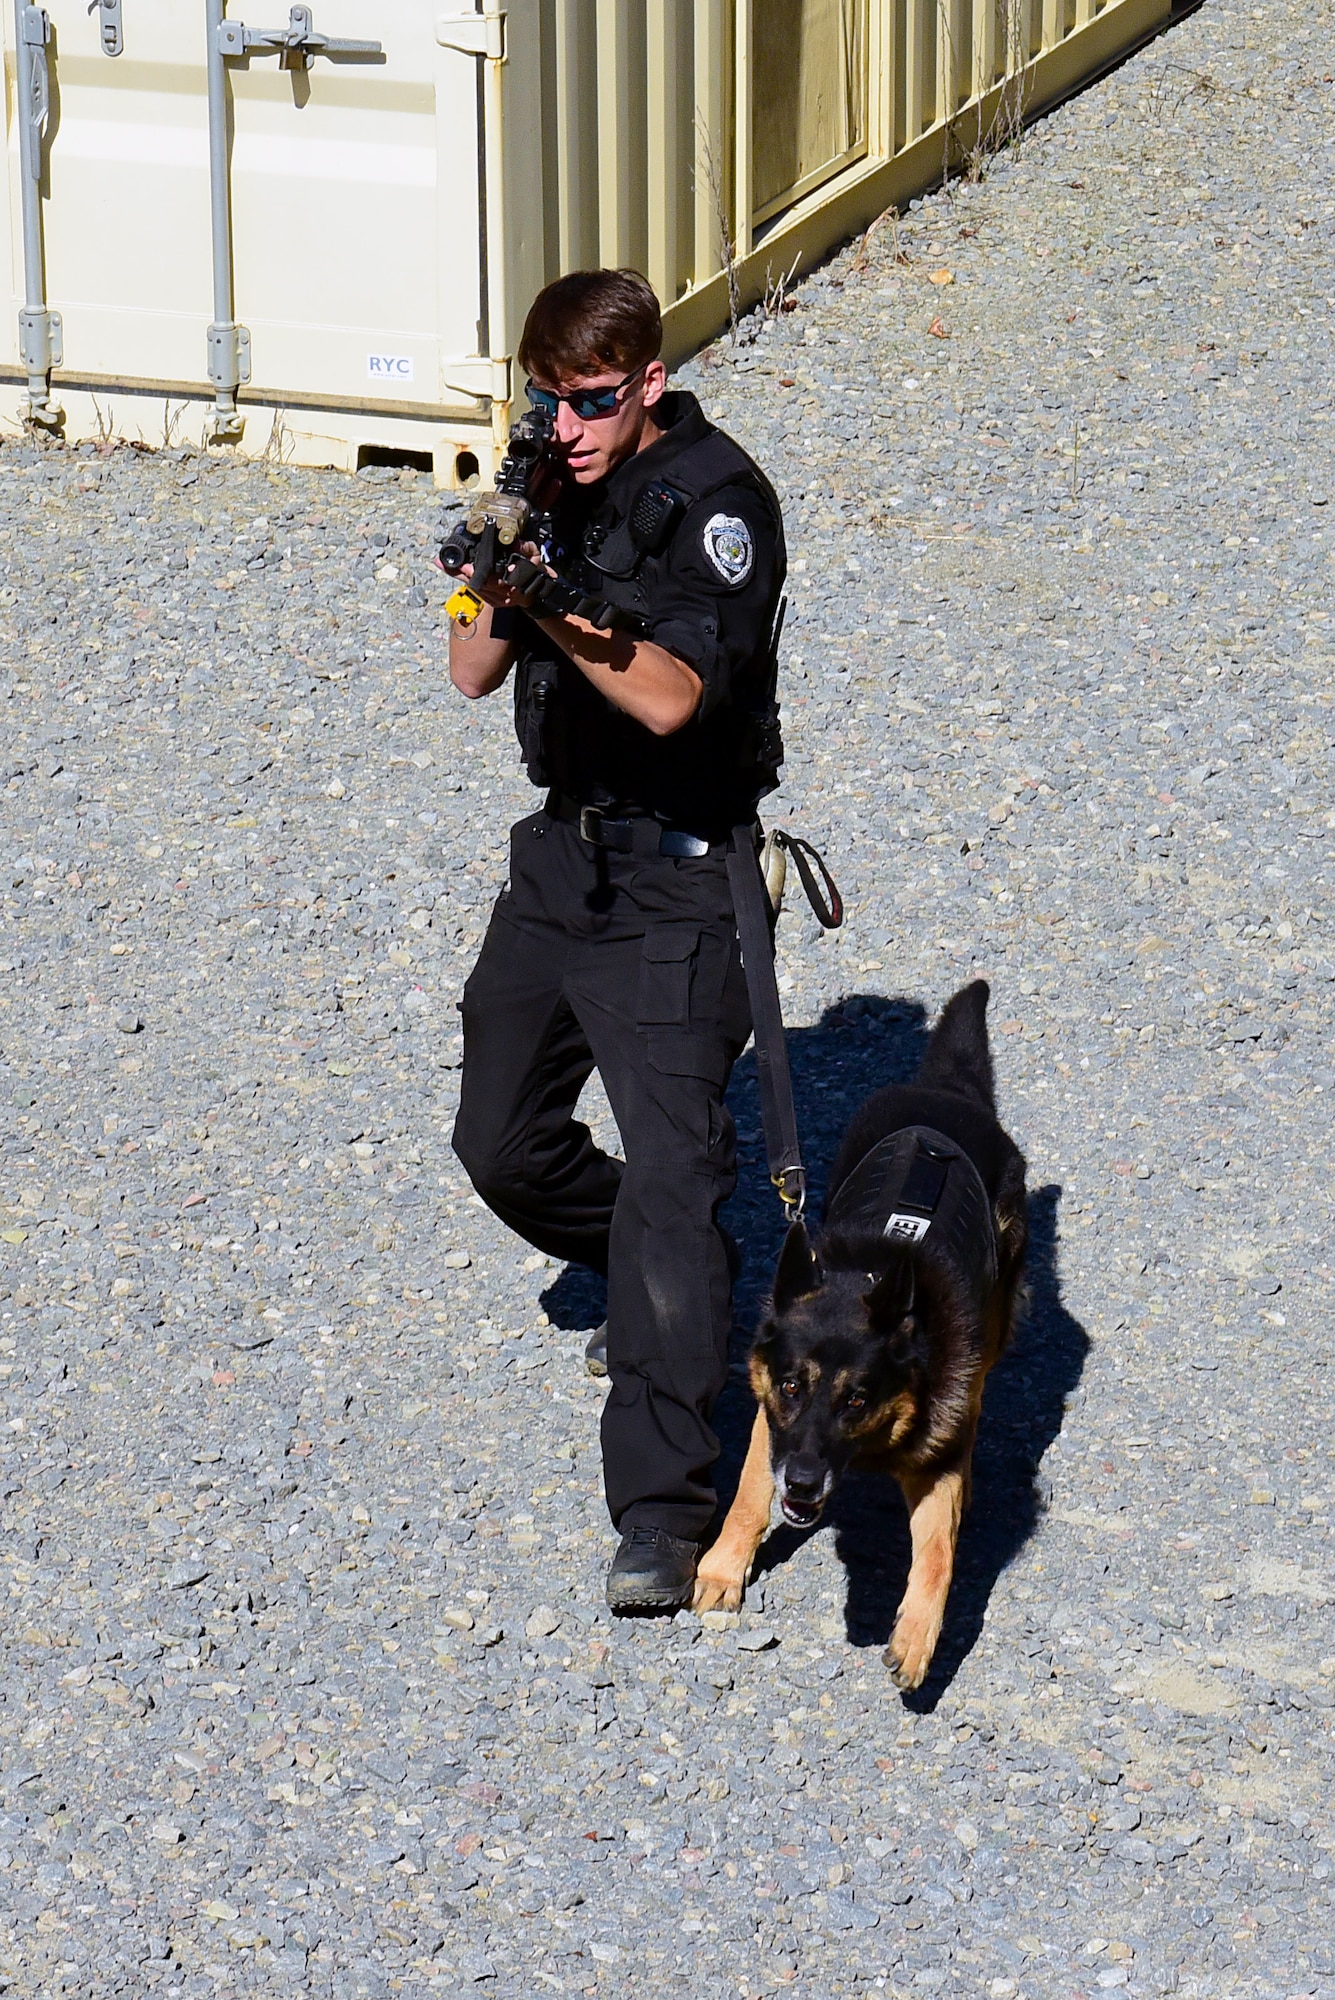 Terry Williams, Stantonsburg Police Department canine officer, and Aaron, police working dog, pursue a simulated suspect in a high-risk patrol scenario during the East Coast Iron Dog competition, Oct. 25, 2017, at Seymour Johnson Air Force Base, North Carolina. During the scenario, the officer exchanged simulated fire with a suspect, followed him into a house, and released the canine to take him down. (U.S. Air Force photo by Airman 1st Class Kenneth Boyton)